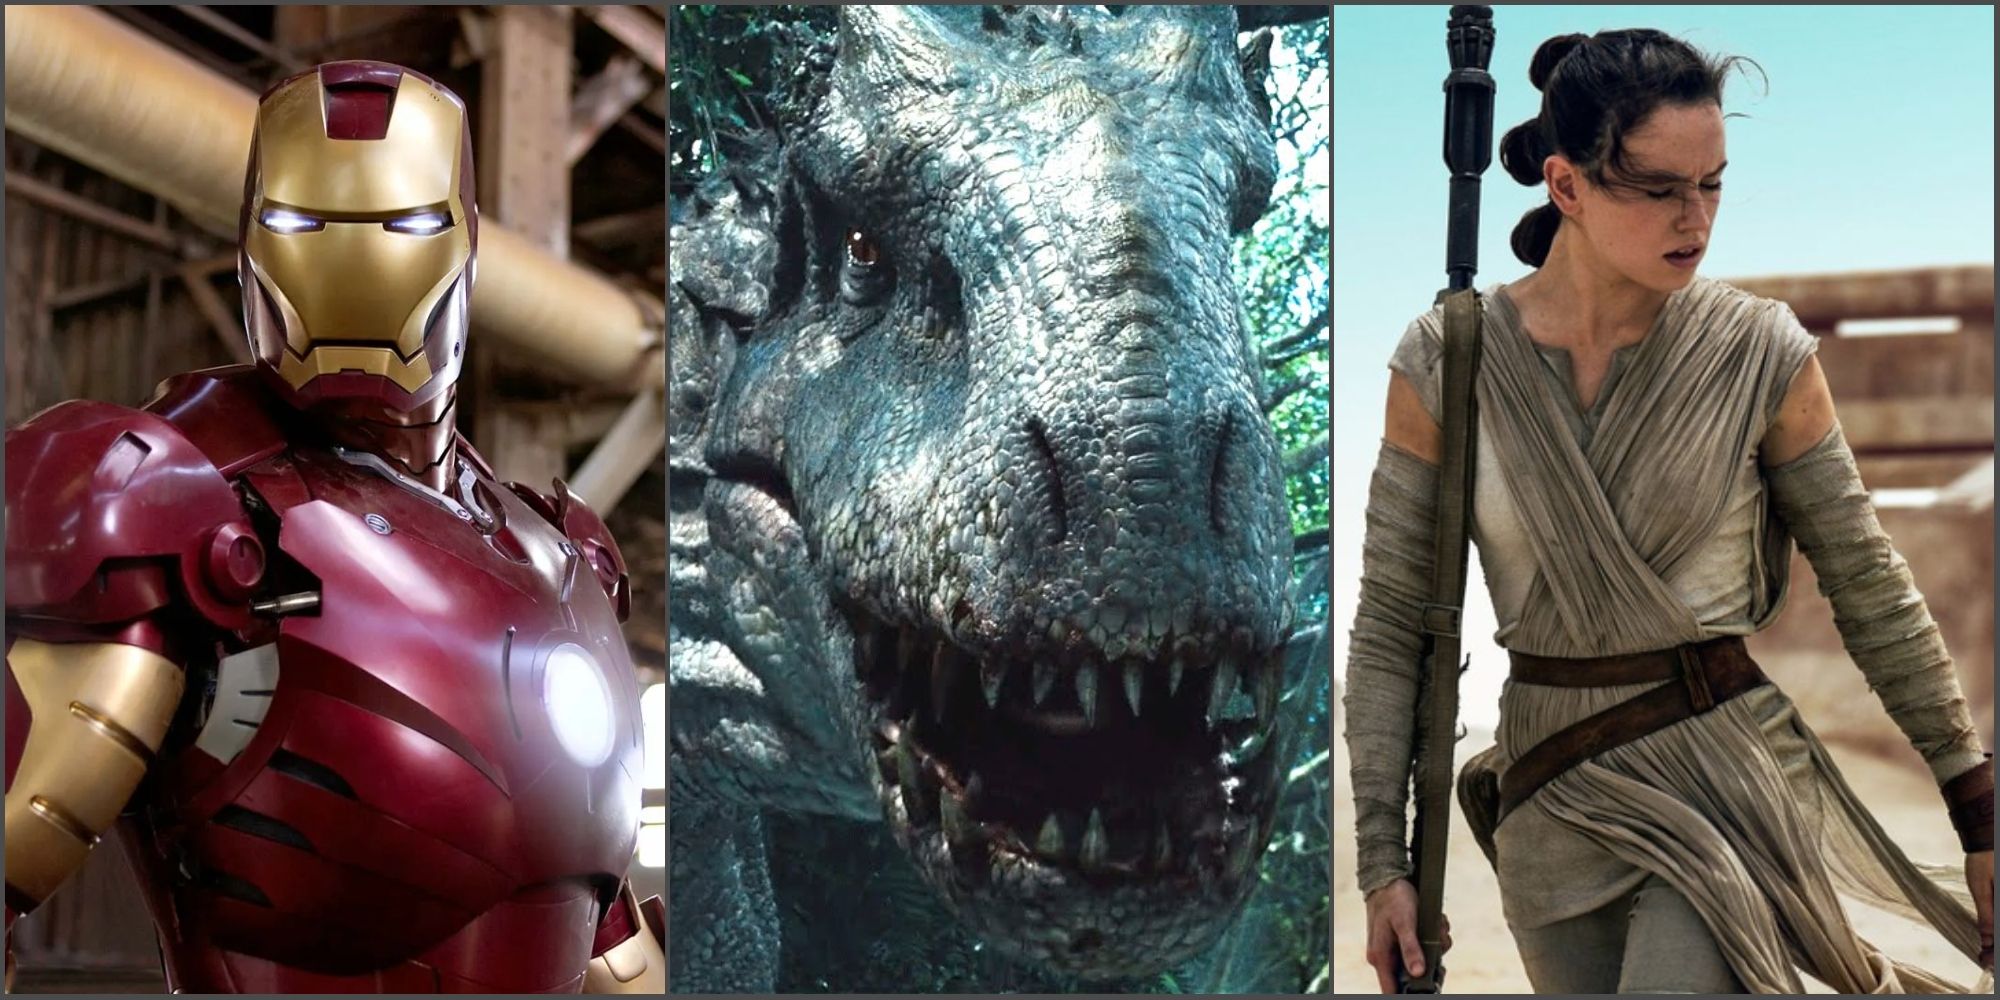 Iron Man in Iron Man, the Indominus Rex in Jurassic World, and Rey in The Force Awakens